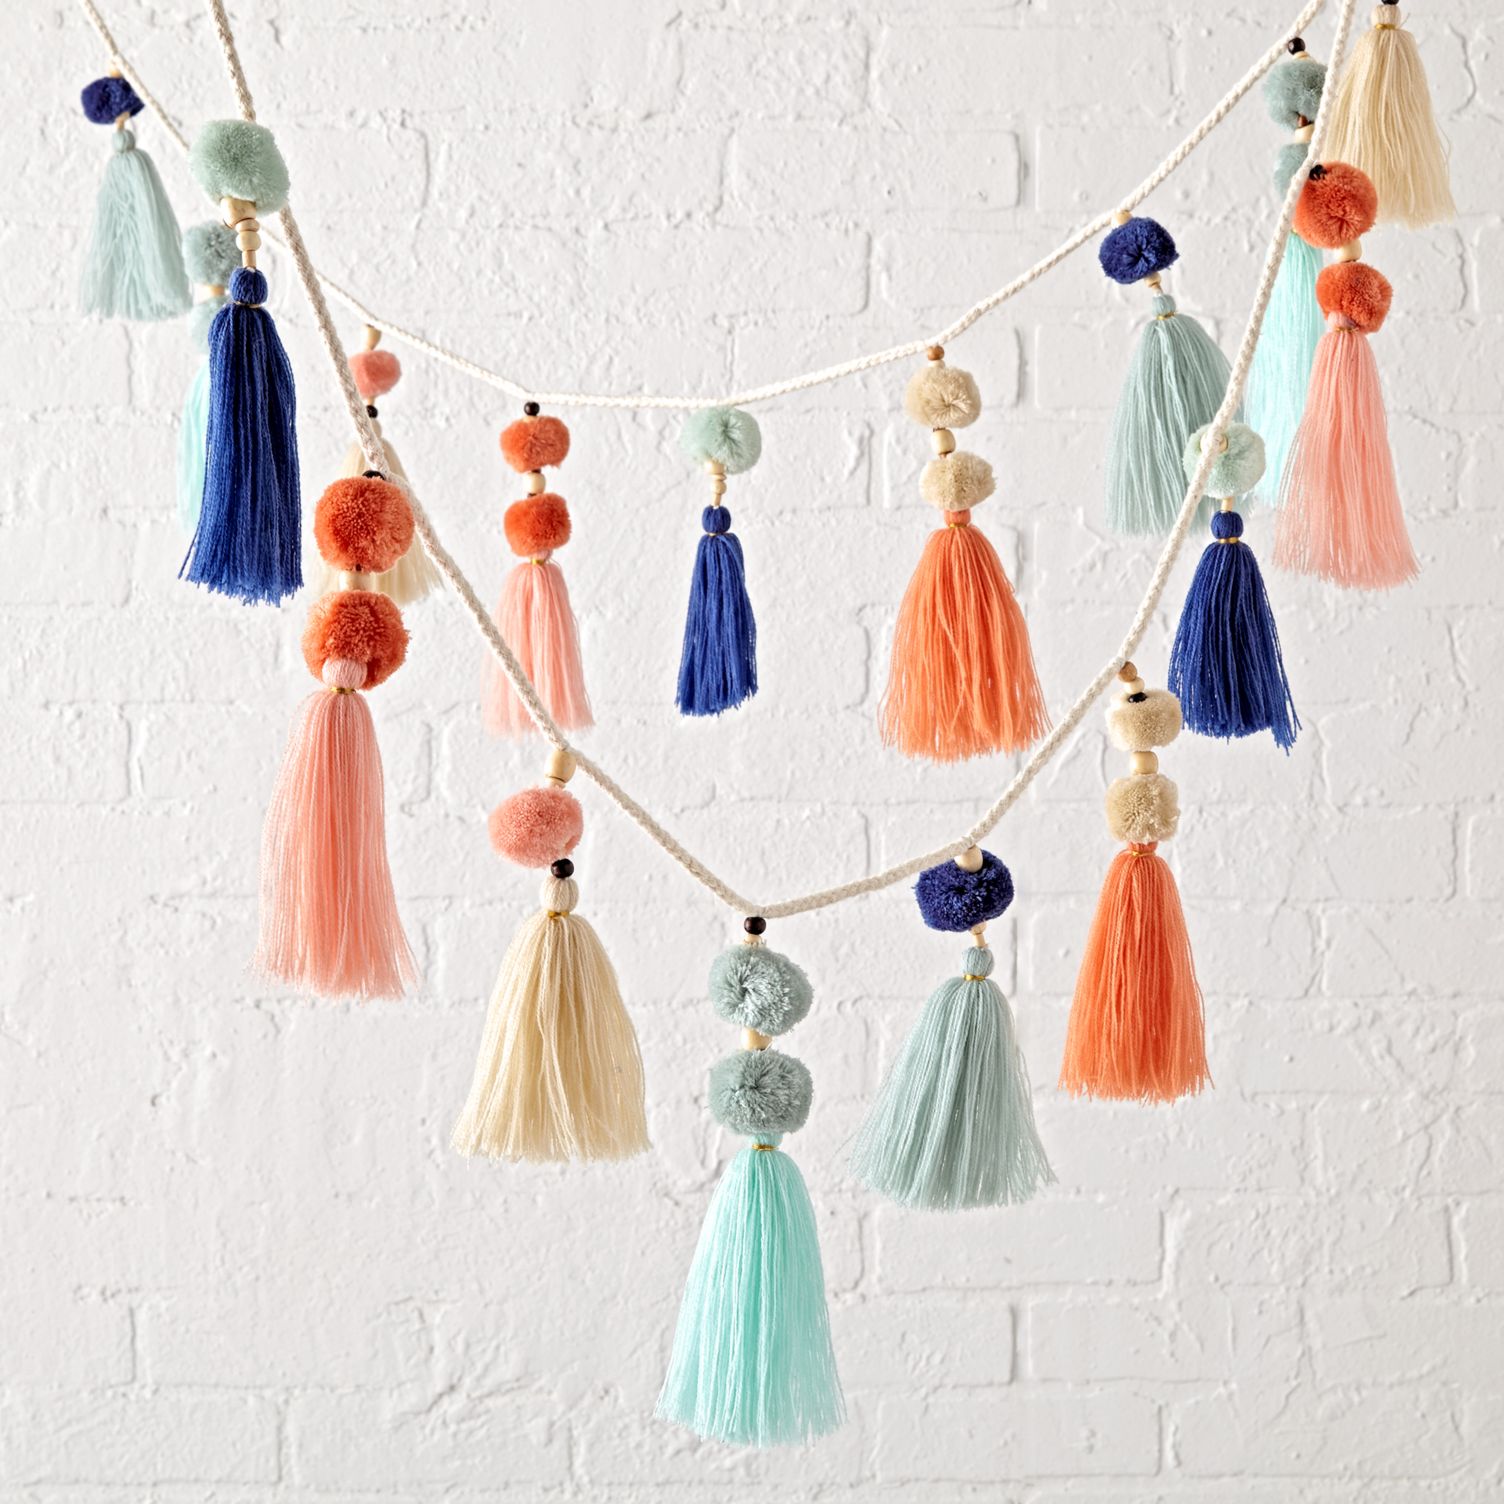 Tassels-in-shades-of-blue-and-peach